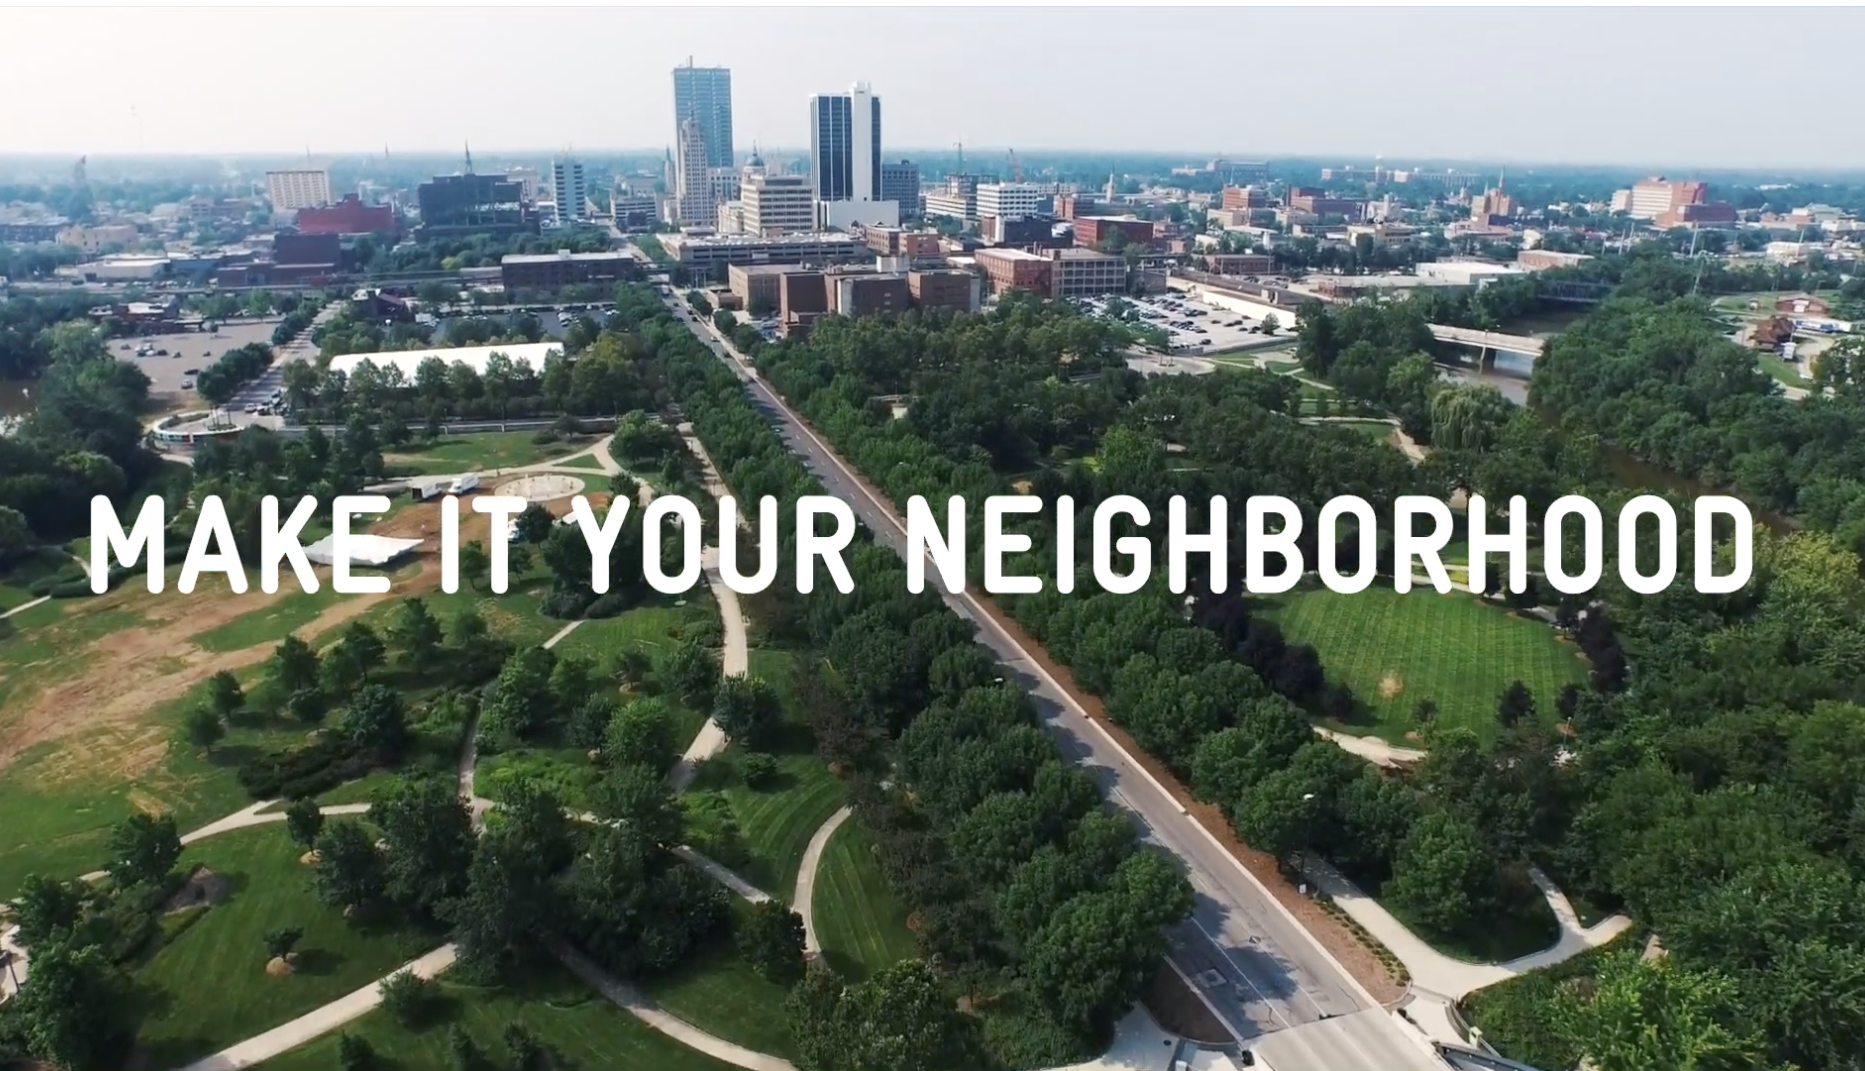 Northeast Indiana has a new regional brand: "Make It Your Own."